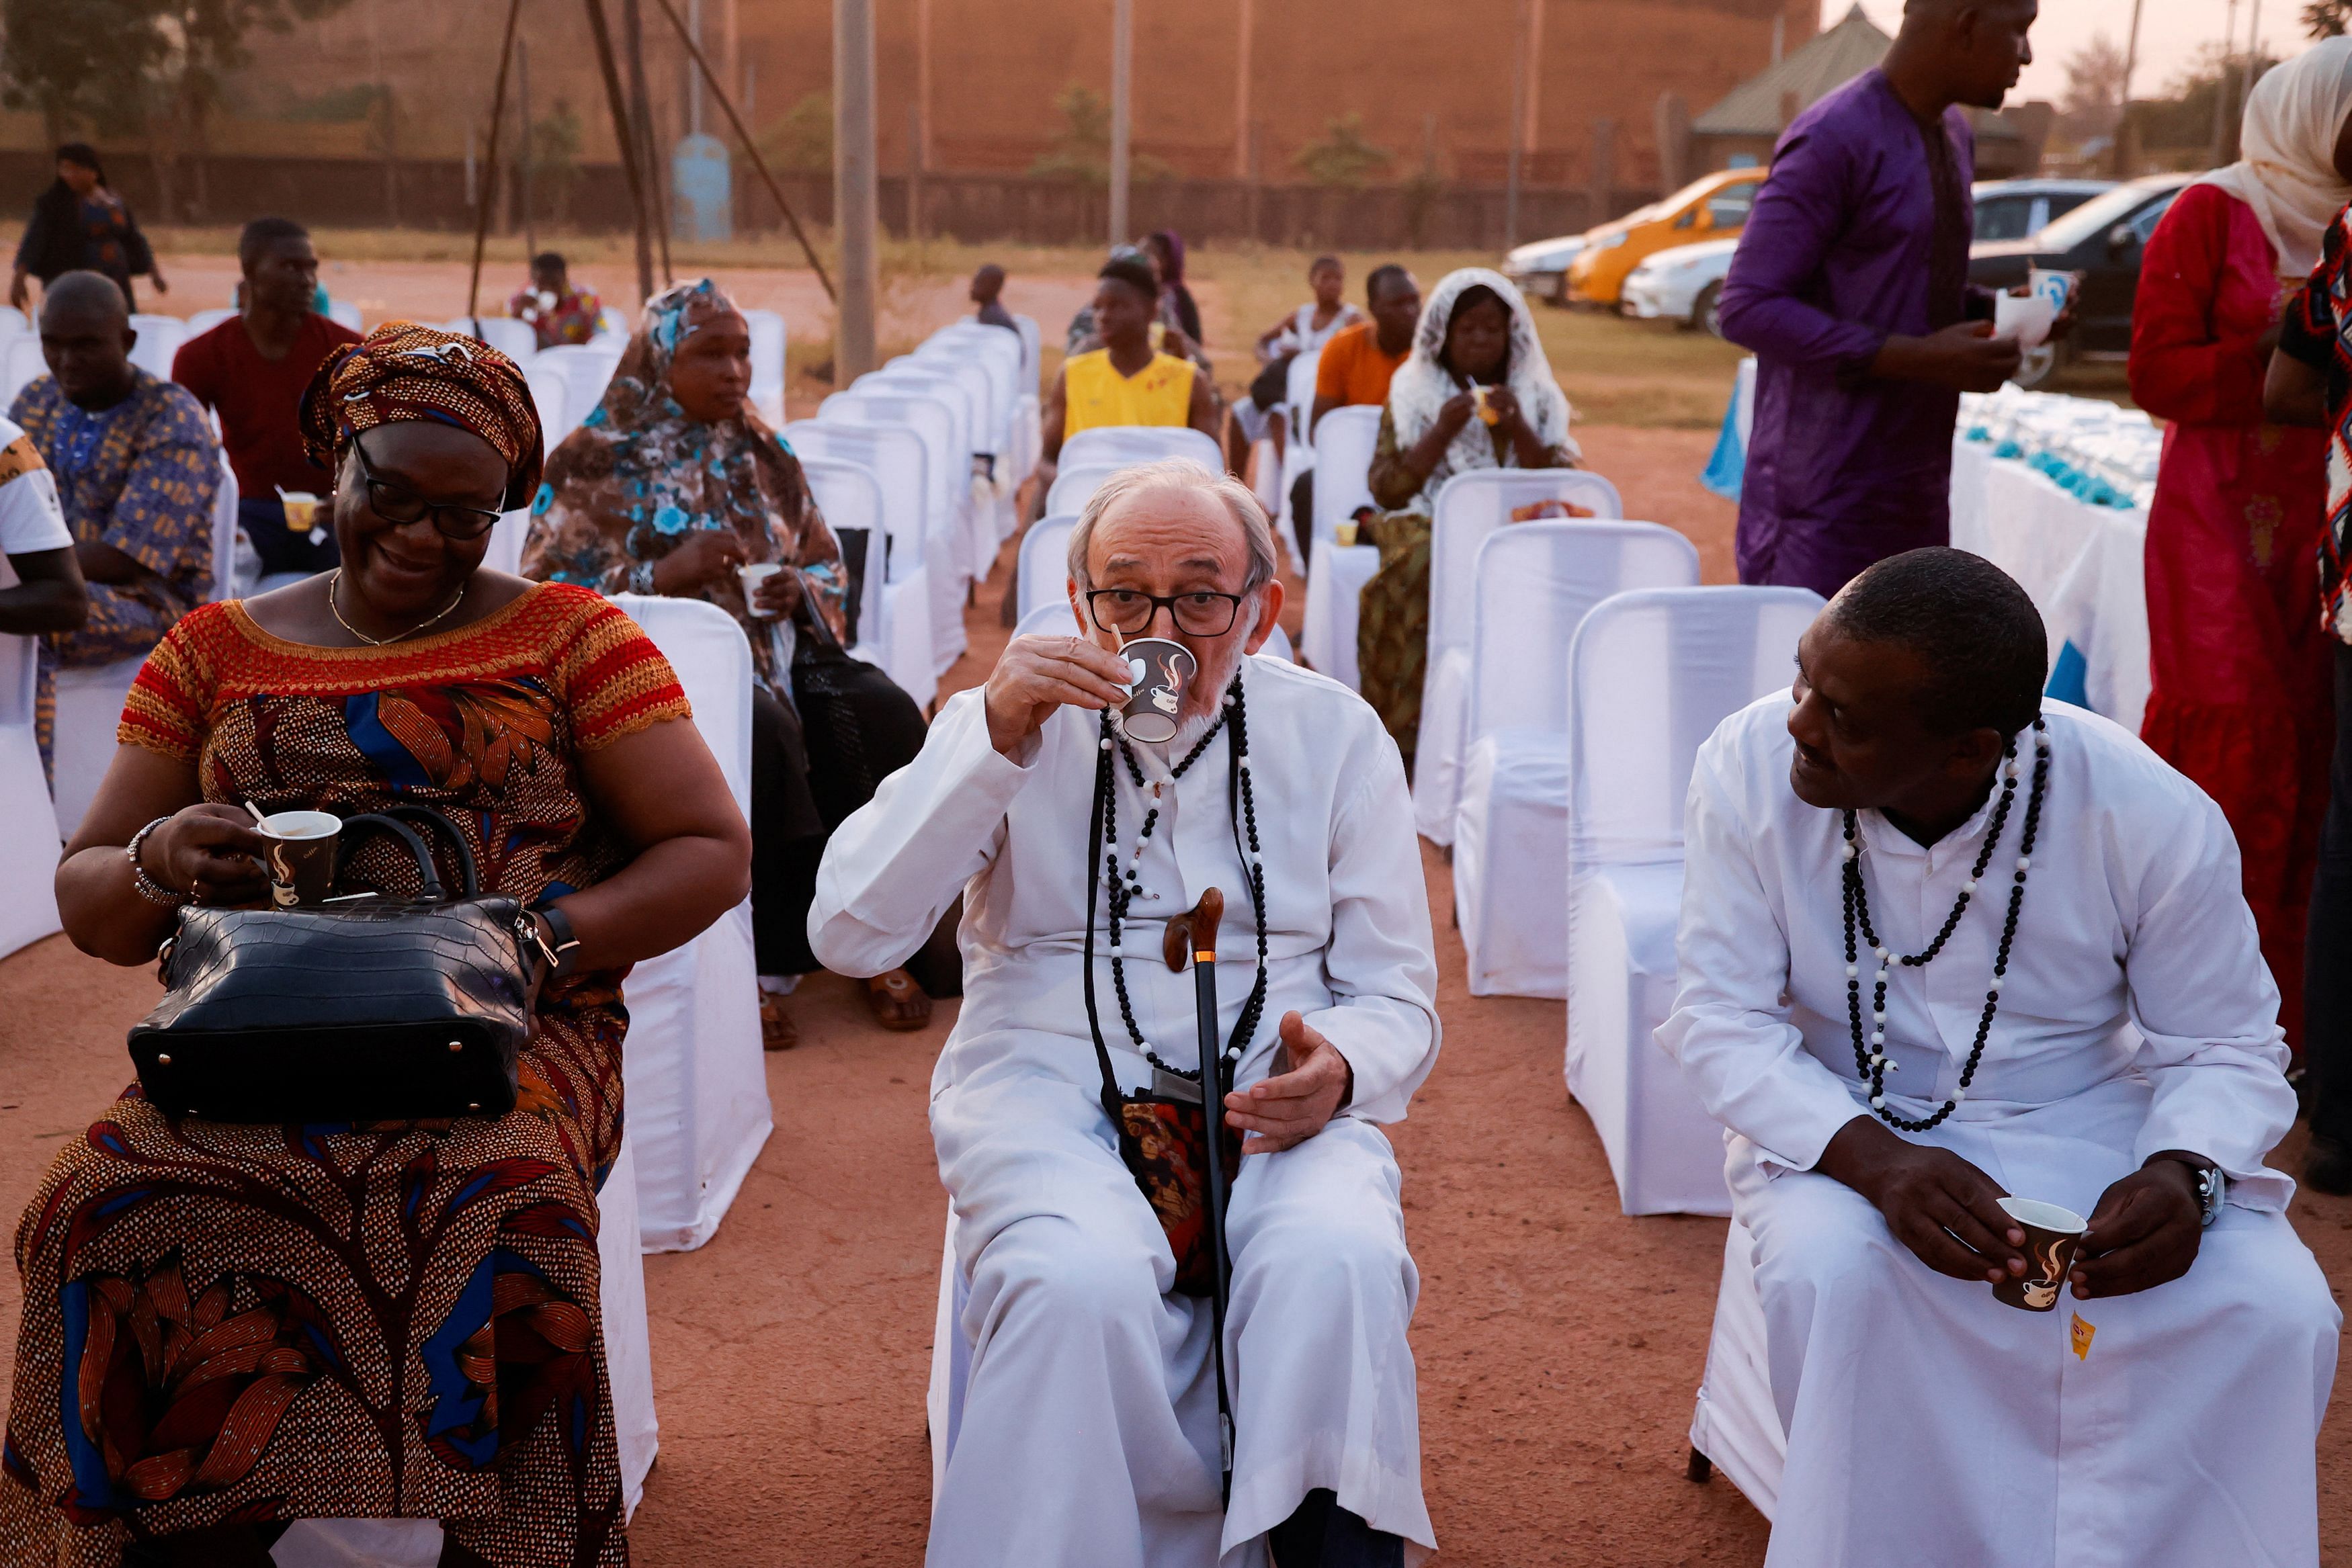 Dominic Appe, a catholic priest drinks coffee as Burkinabe Muslims and Christians gather to break the fast together in hopes of promoting religious tolerance during the Ramadan in Ouagadougou’s public square, Burkina Faso March 31, 2023.REUTERS/ Yempabou Ouoba       NO RESALES. NO ARCHIVES.